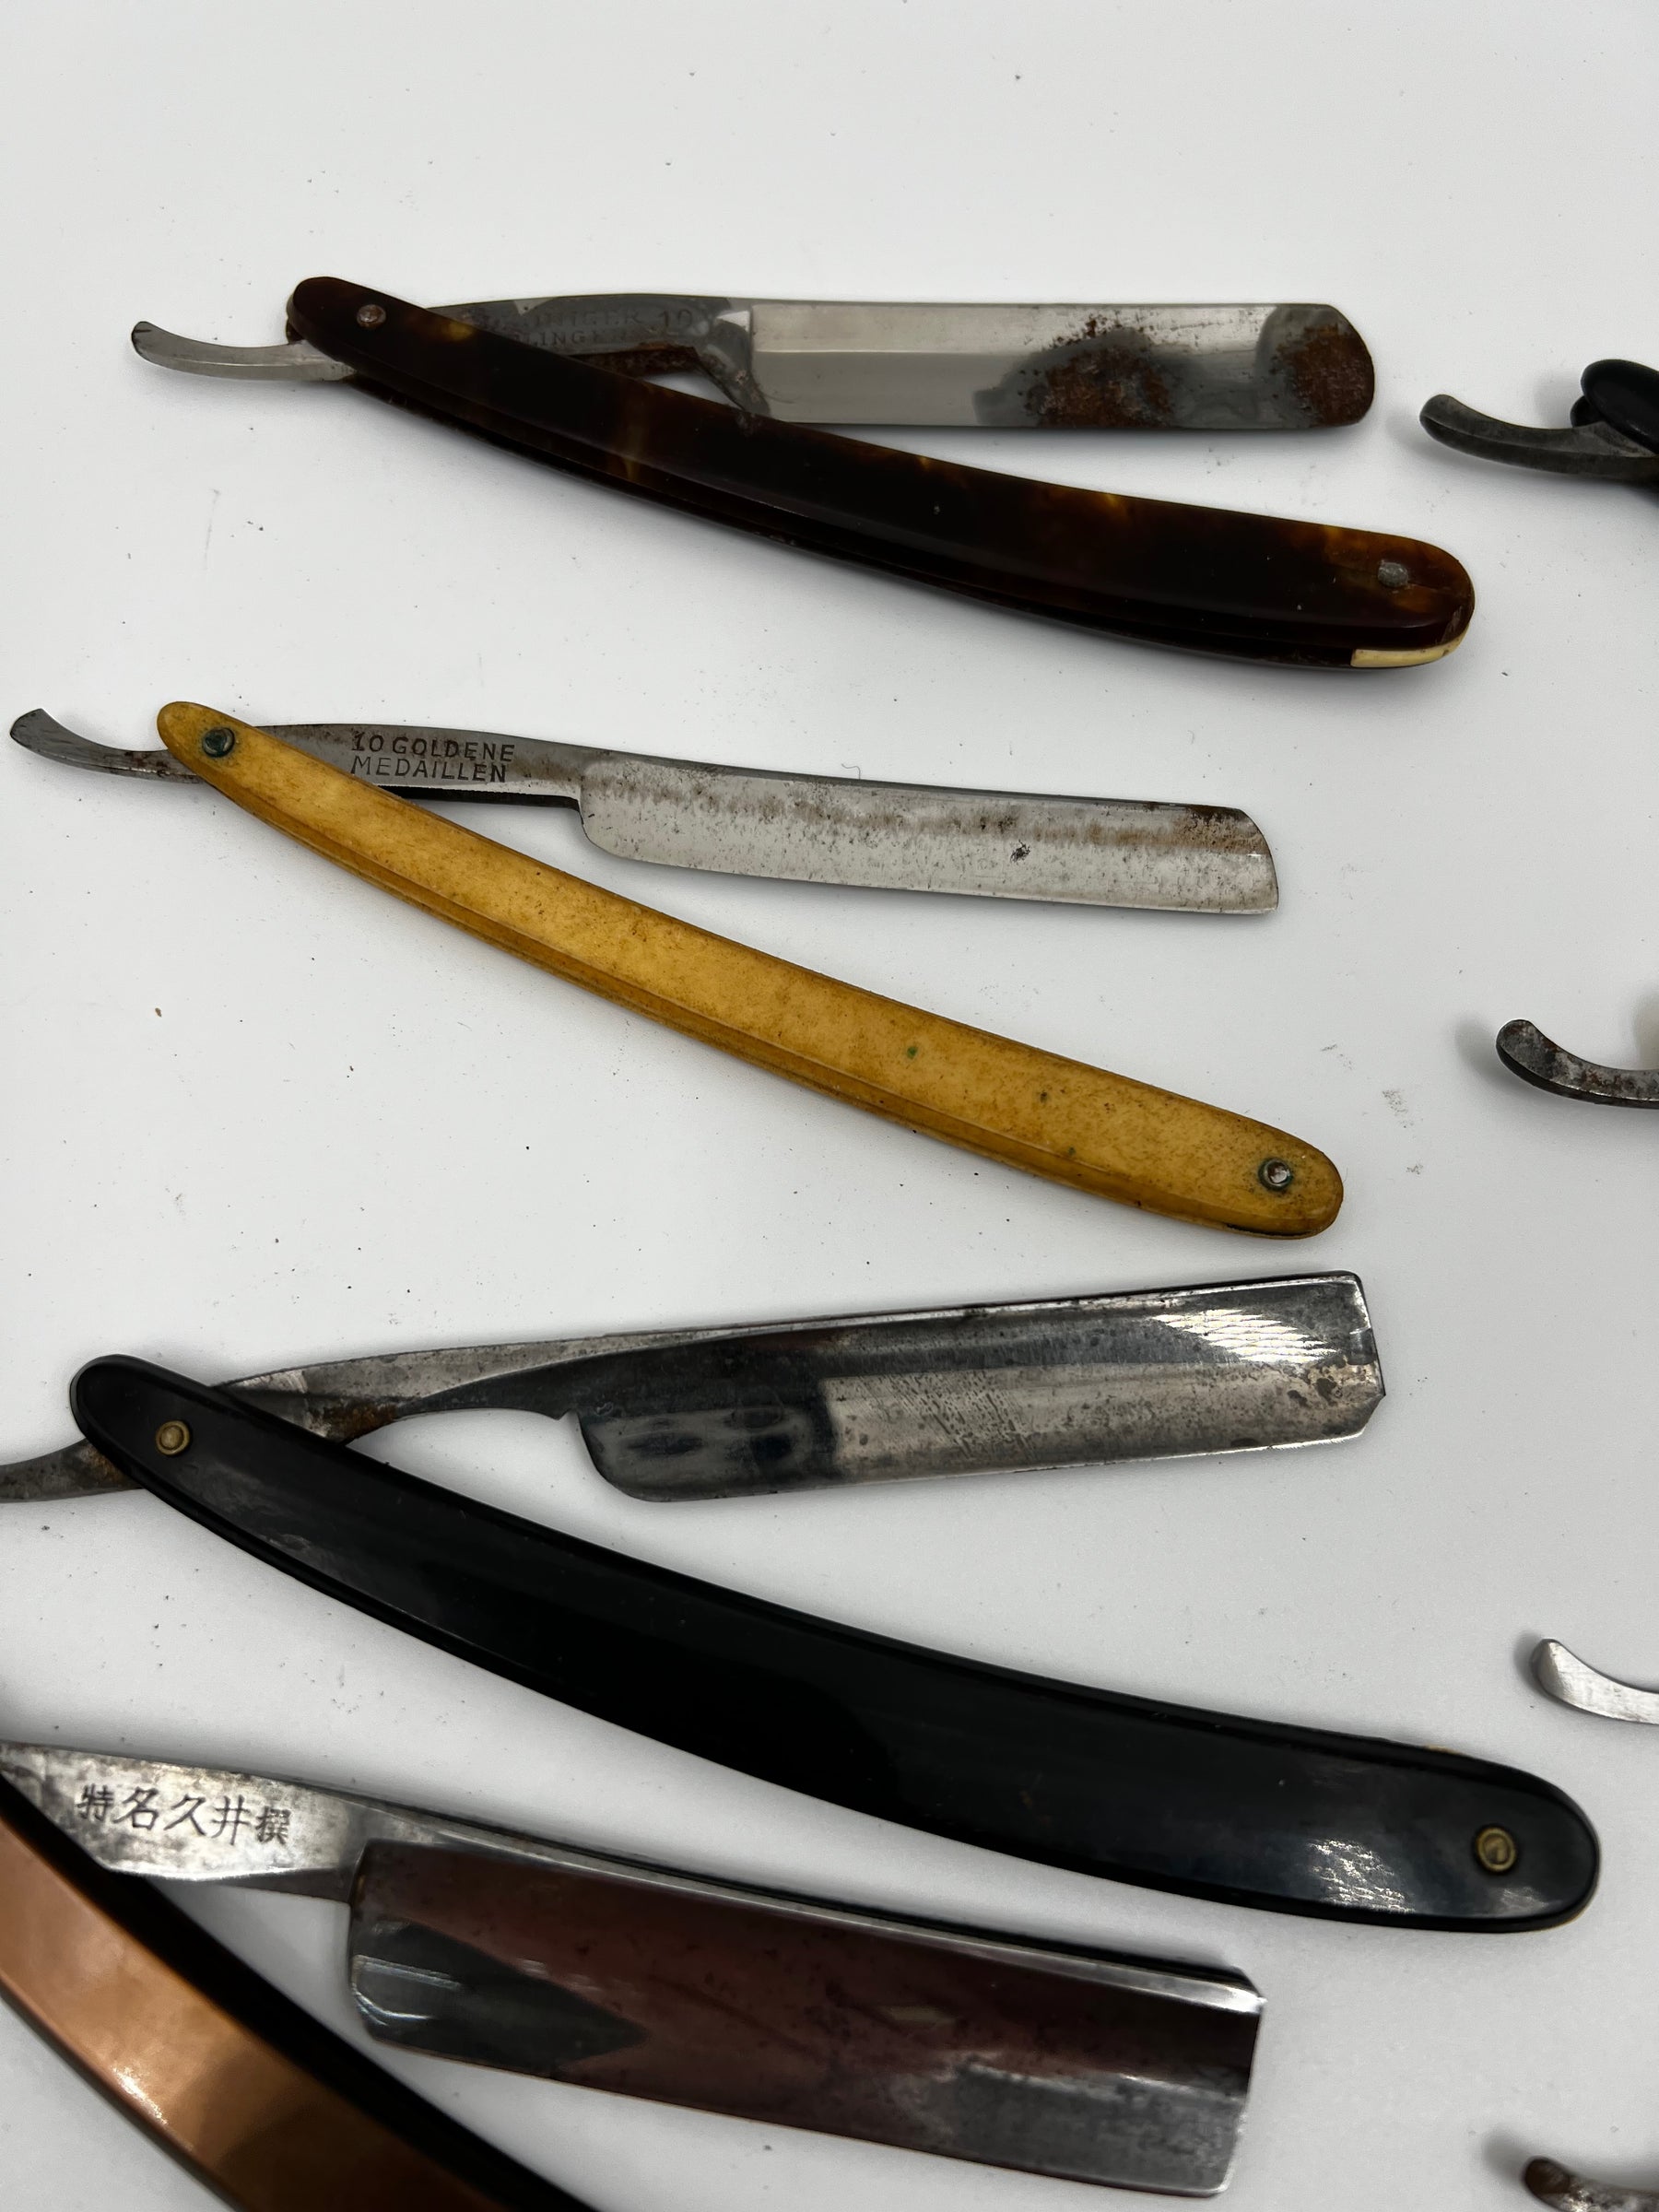 Vintage 10 Straight Razor Lot #24 - May Contain Sheffield, Solingen, Japanese & USA makers, as pictured